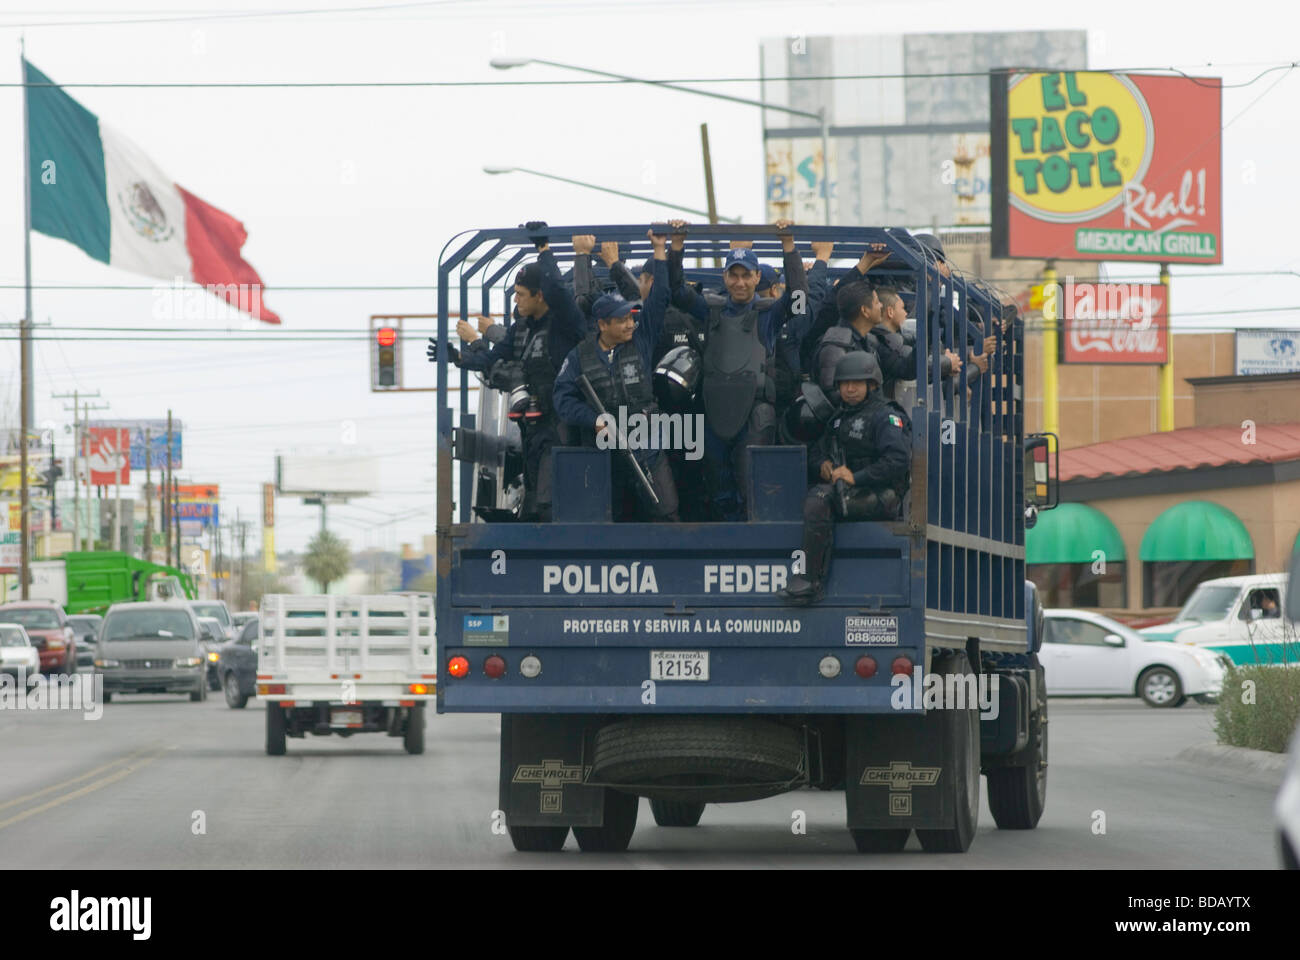 Trucks loaded with federal police forces move through the streets of Ciudad Juarez during early morning rounds Stock Photo